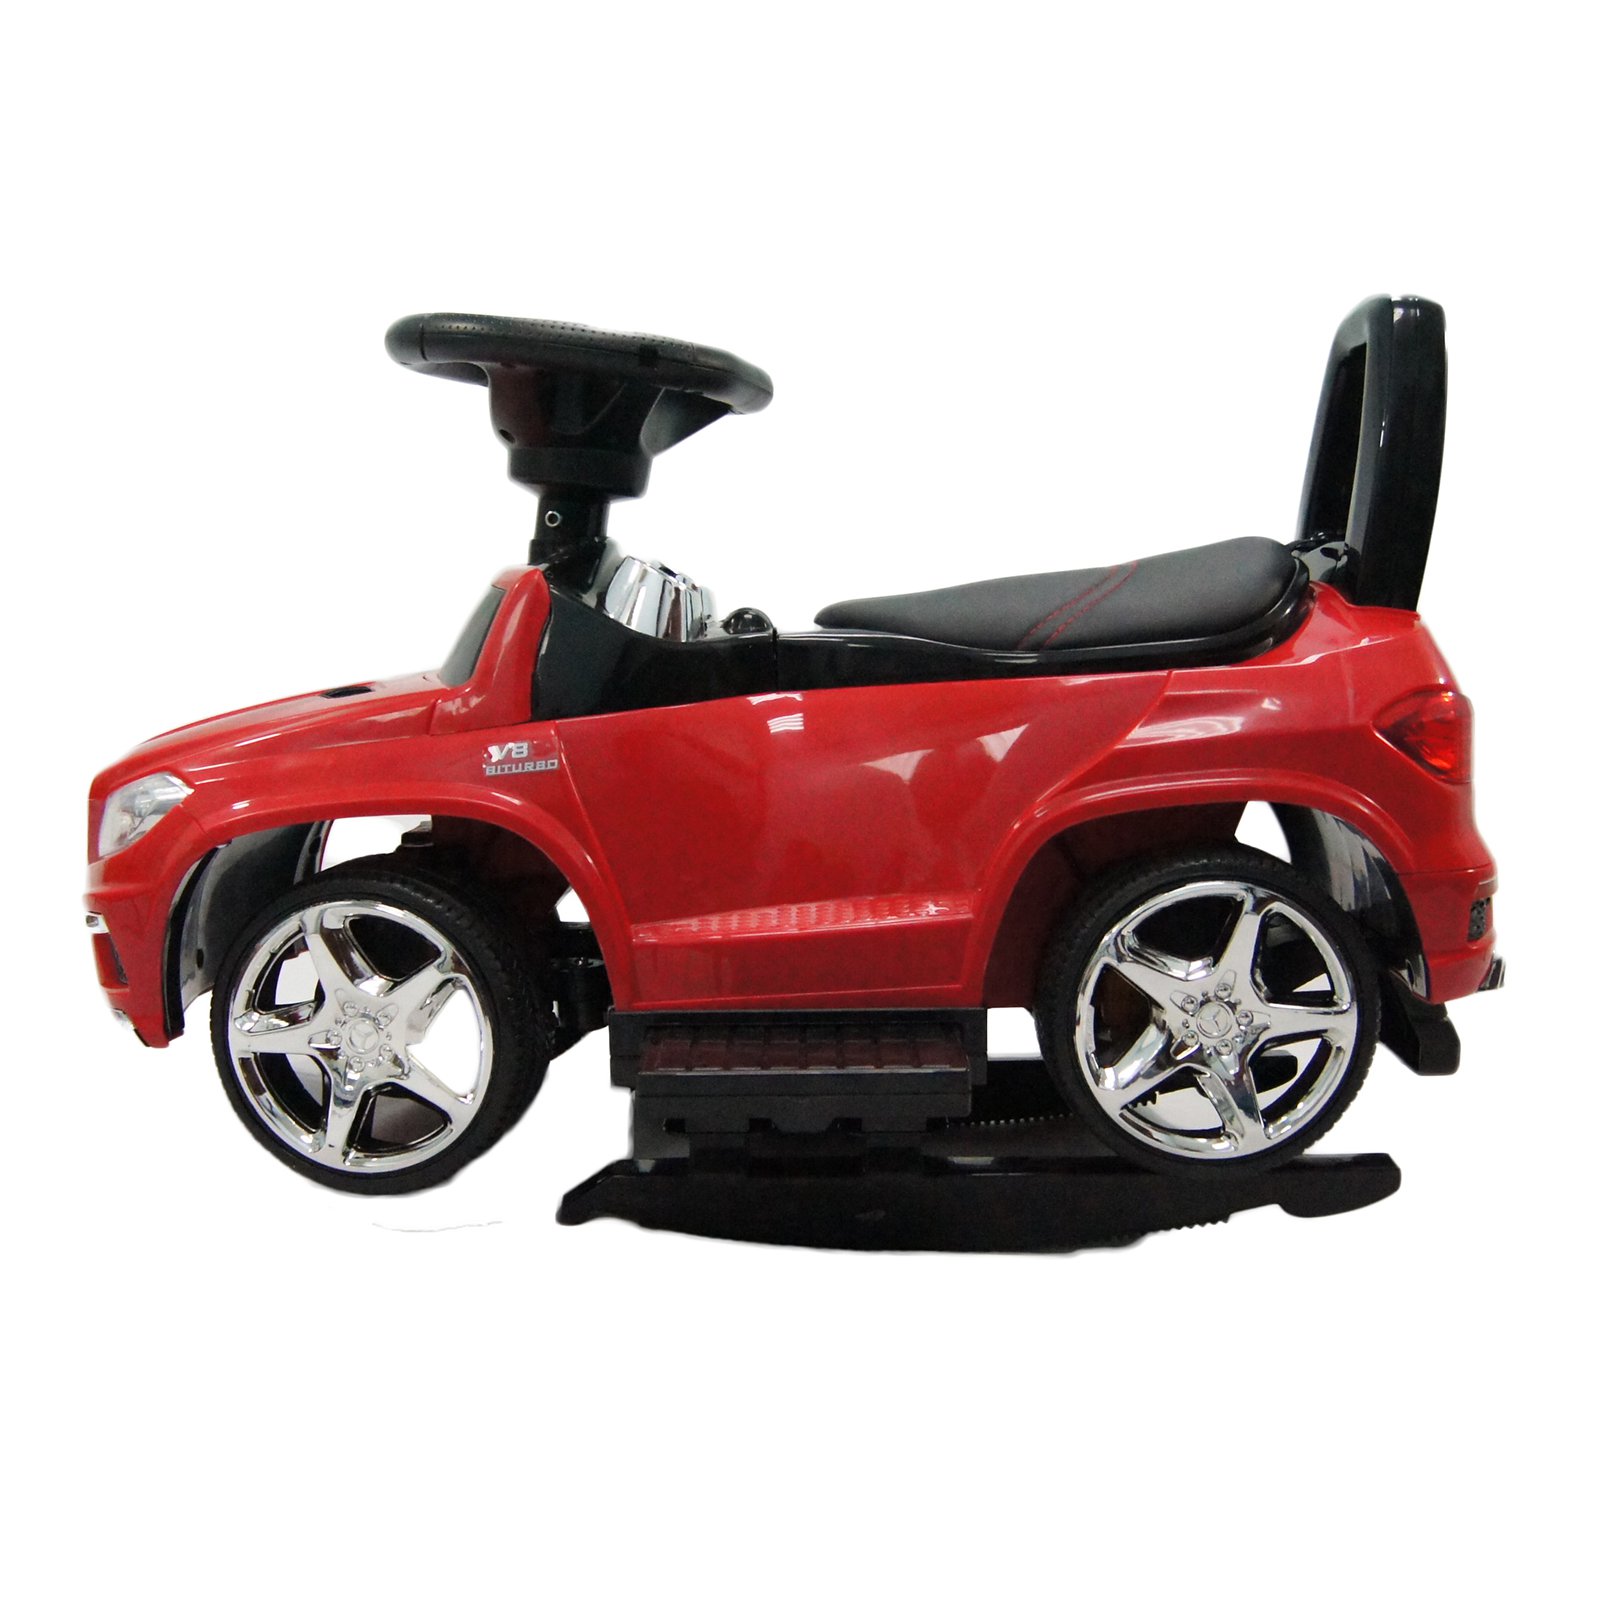 Best Ride on Cars 4 in 1 MERCEDES Push Riding Child Toy Car White | eBay